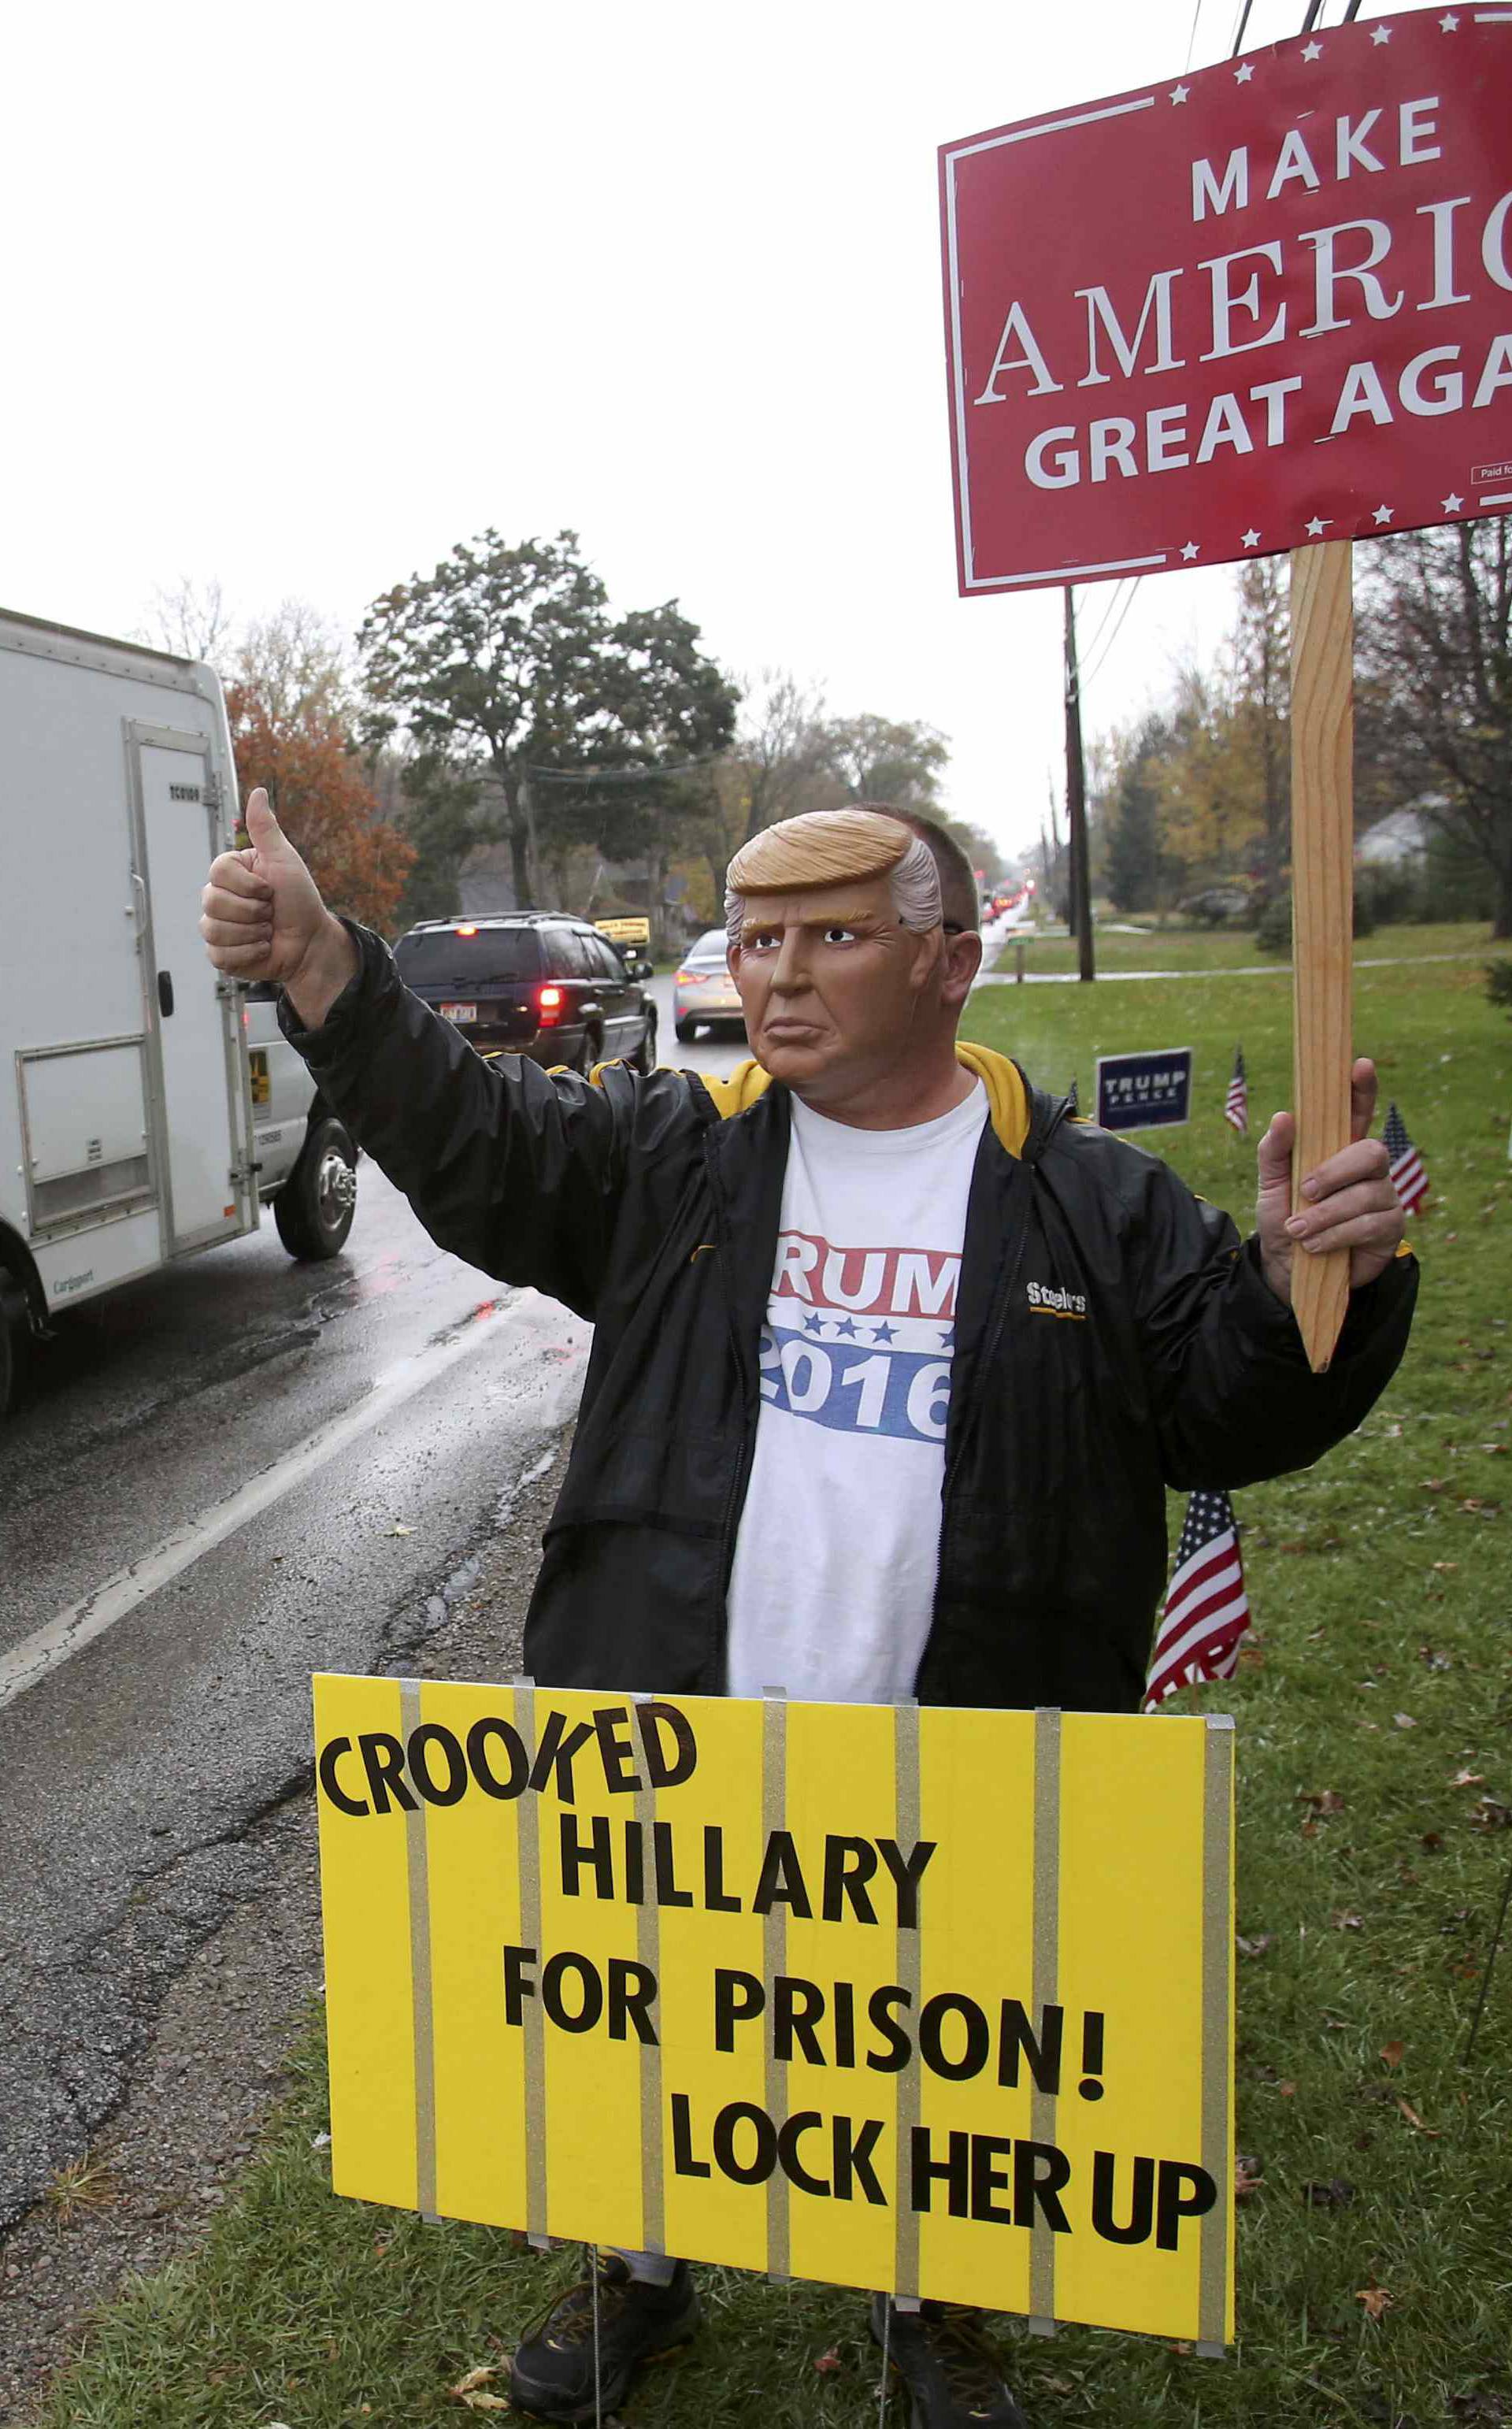 Robert Stottlemire waves to cars as they pass by while wearing a Donald Trump mask during the U.S. presidential election in Ohio